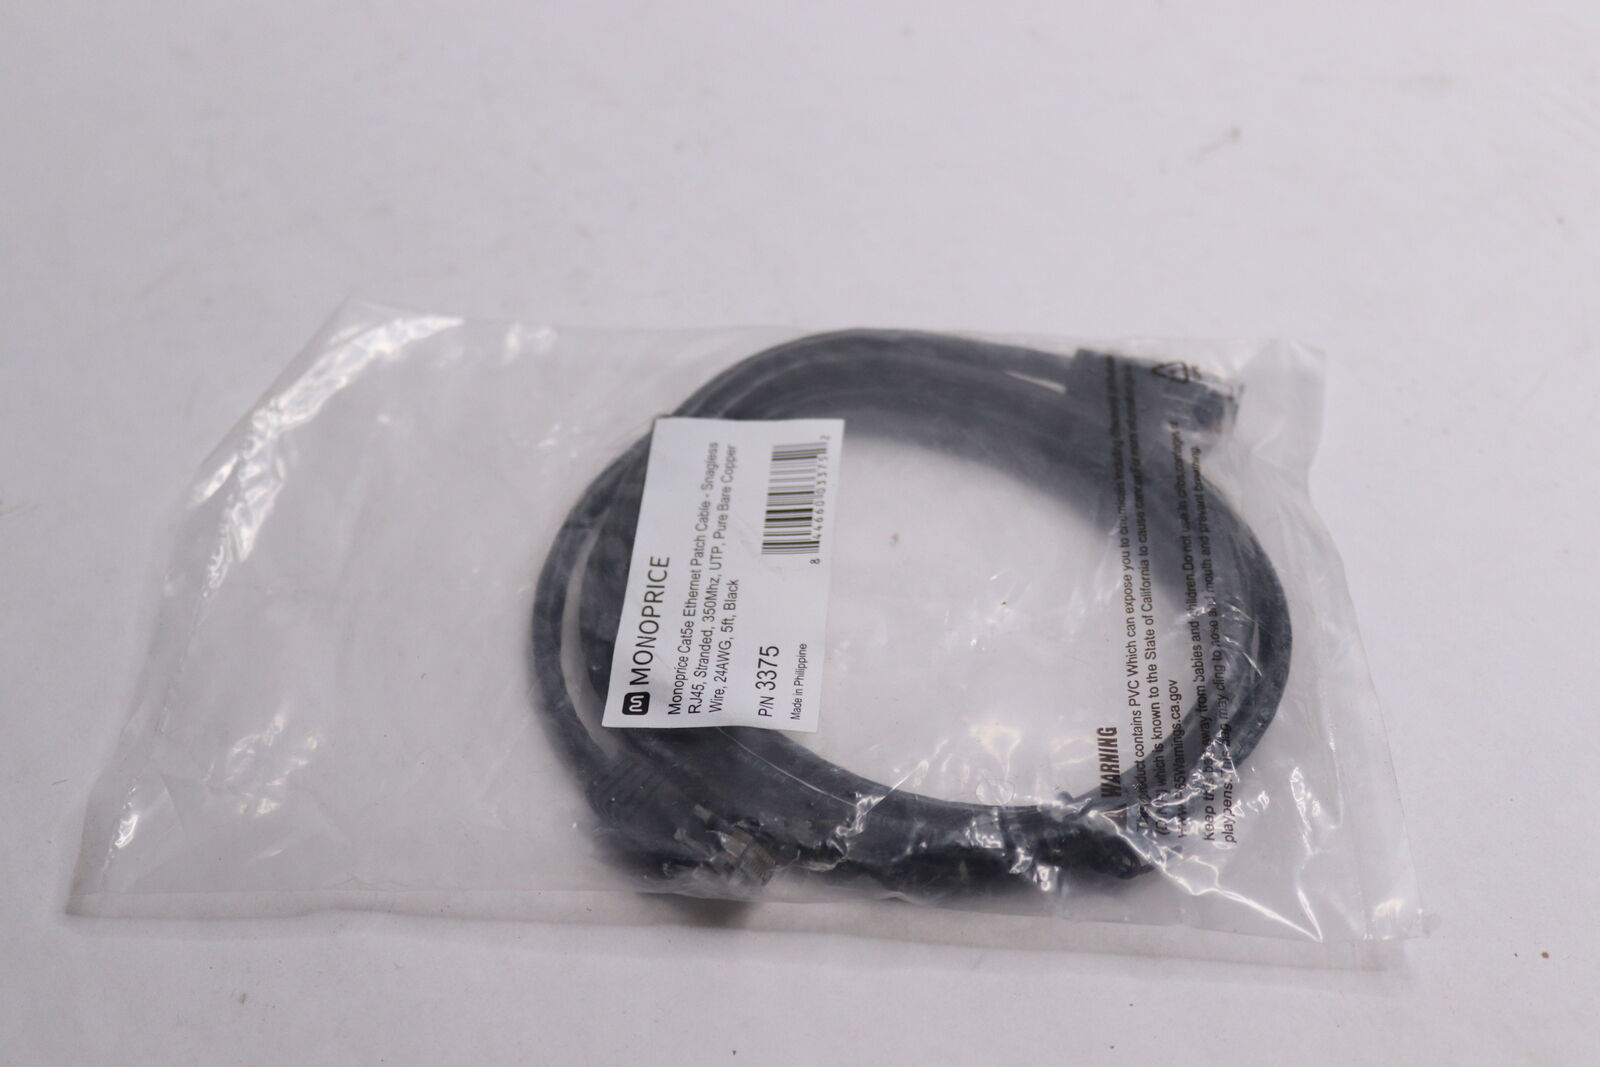 Monoprice Ethernet Patch Cable Snagless Black 24 AWG 5' 3375